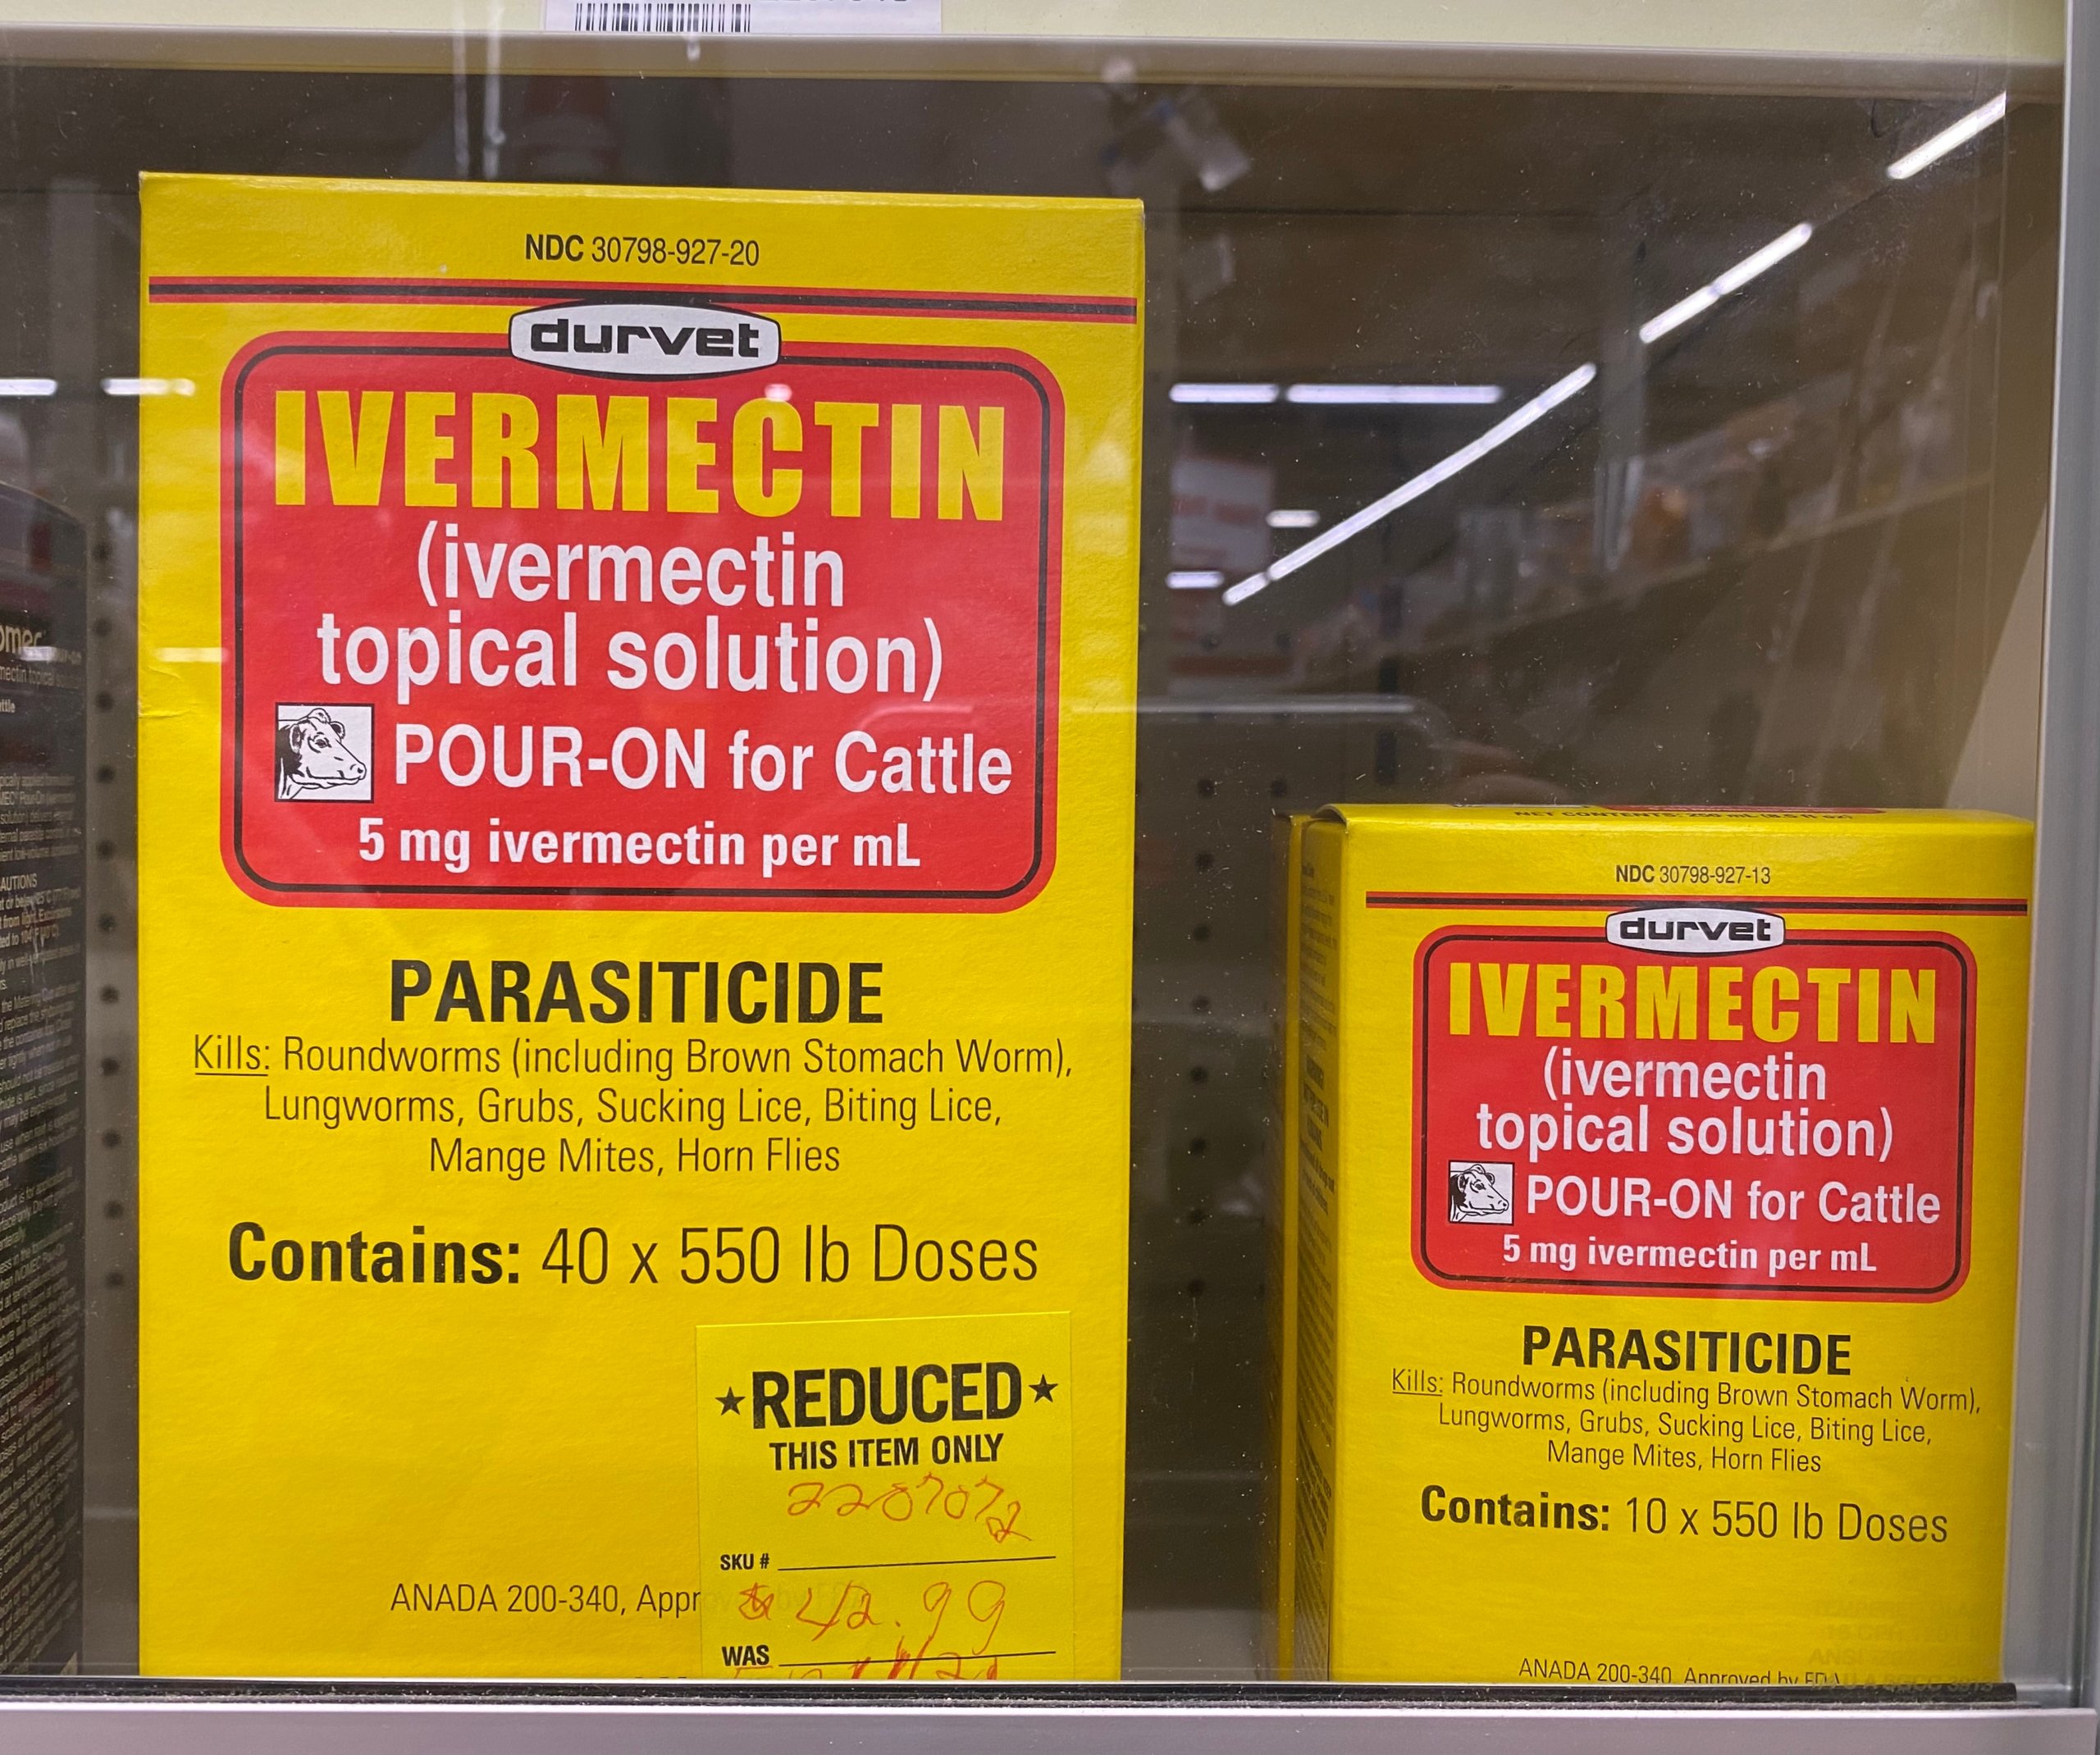 State issues warnings on ivermectin use